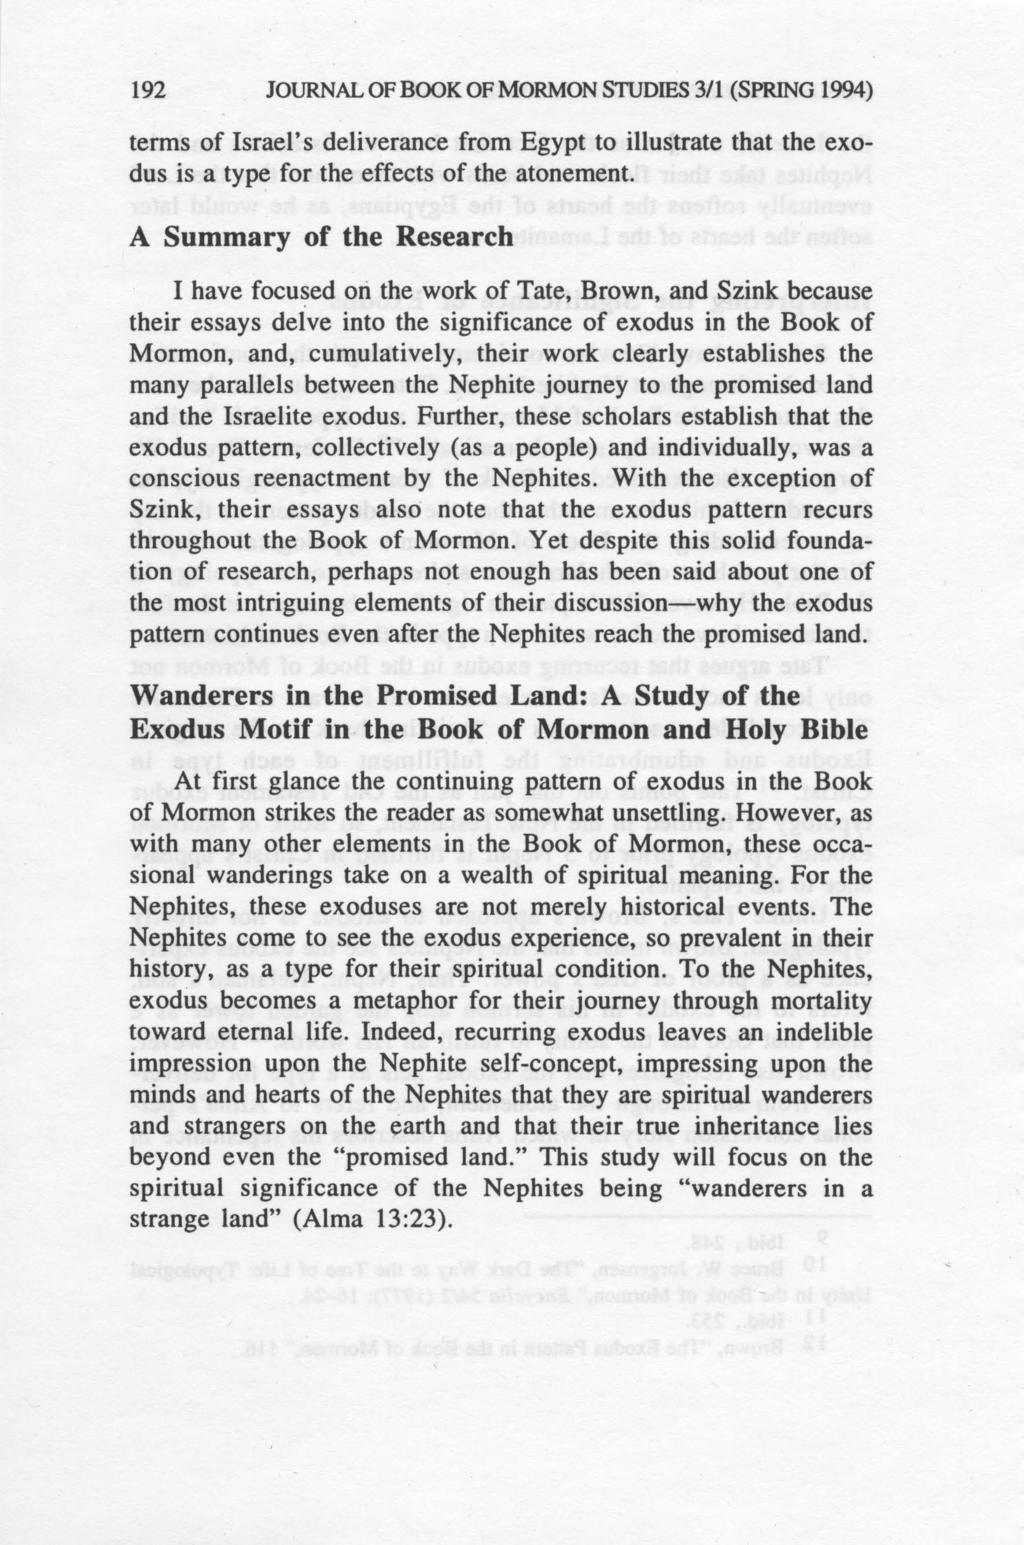 192 JOURNAL OF BOOK OF MORMON STUDIES 3/1 (SPRING 1994) terms of Israel's deliverance from Egypt to illustrate that the exodus is a type for the effects of the atonement.